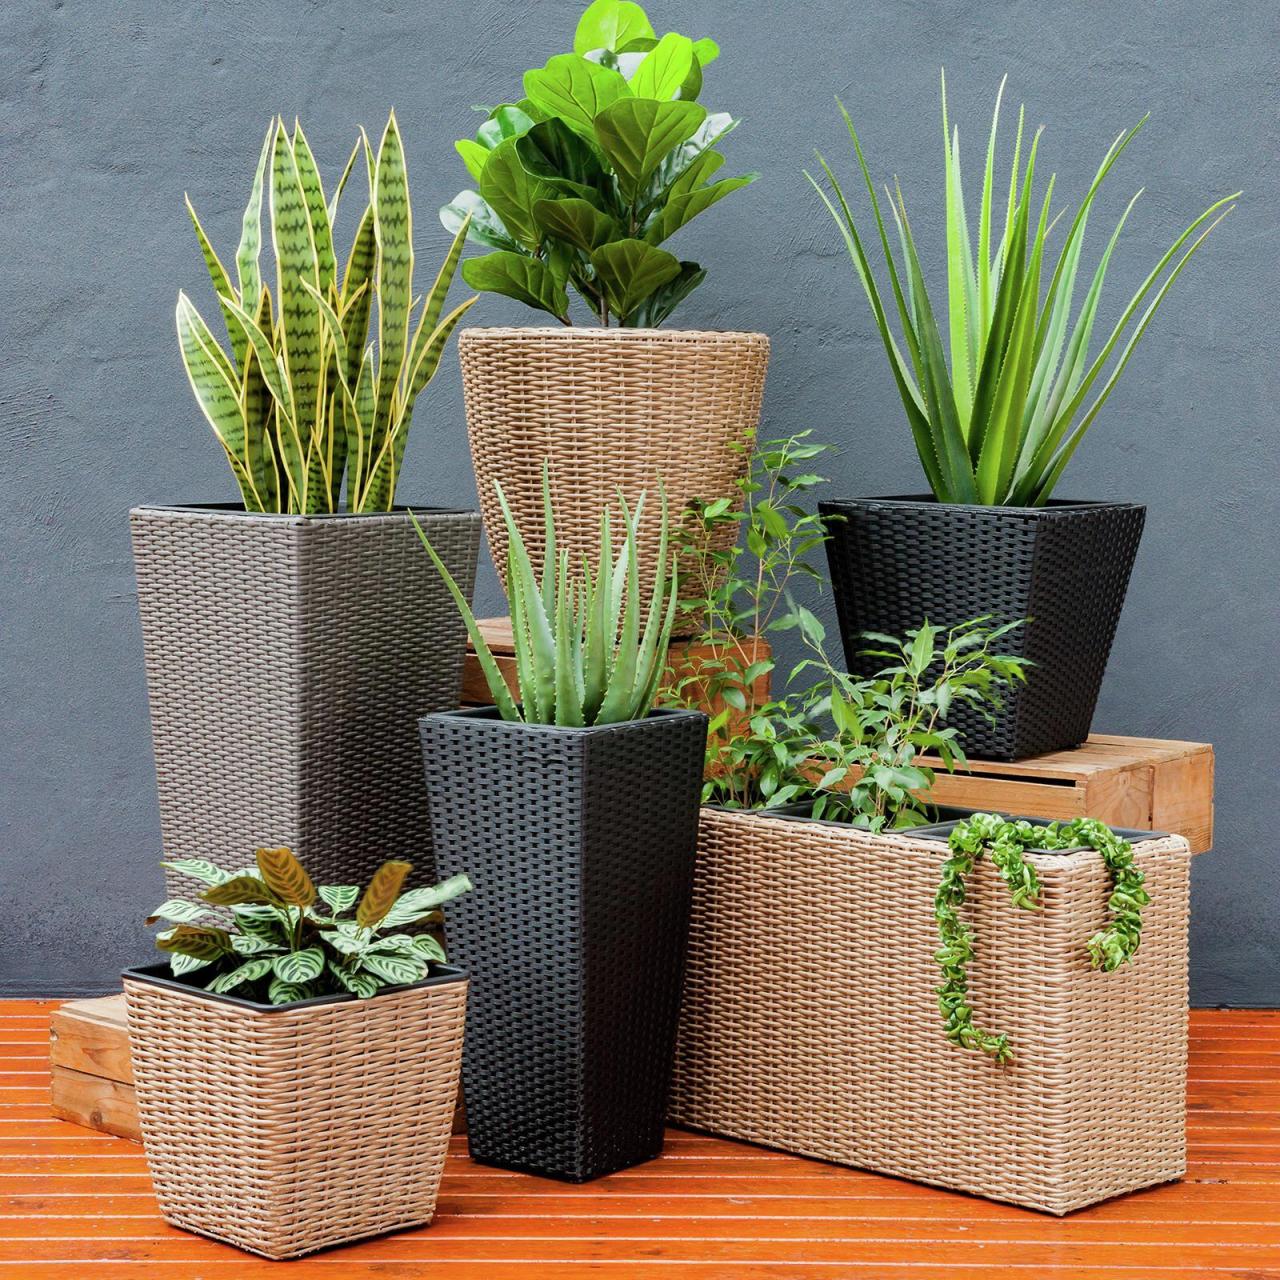 Hanging Plants Indoor | Bunnings Baskets for Plants: A Guide to Choosing, Planting, and Using